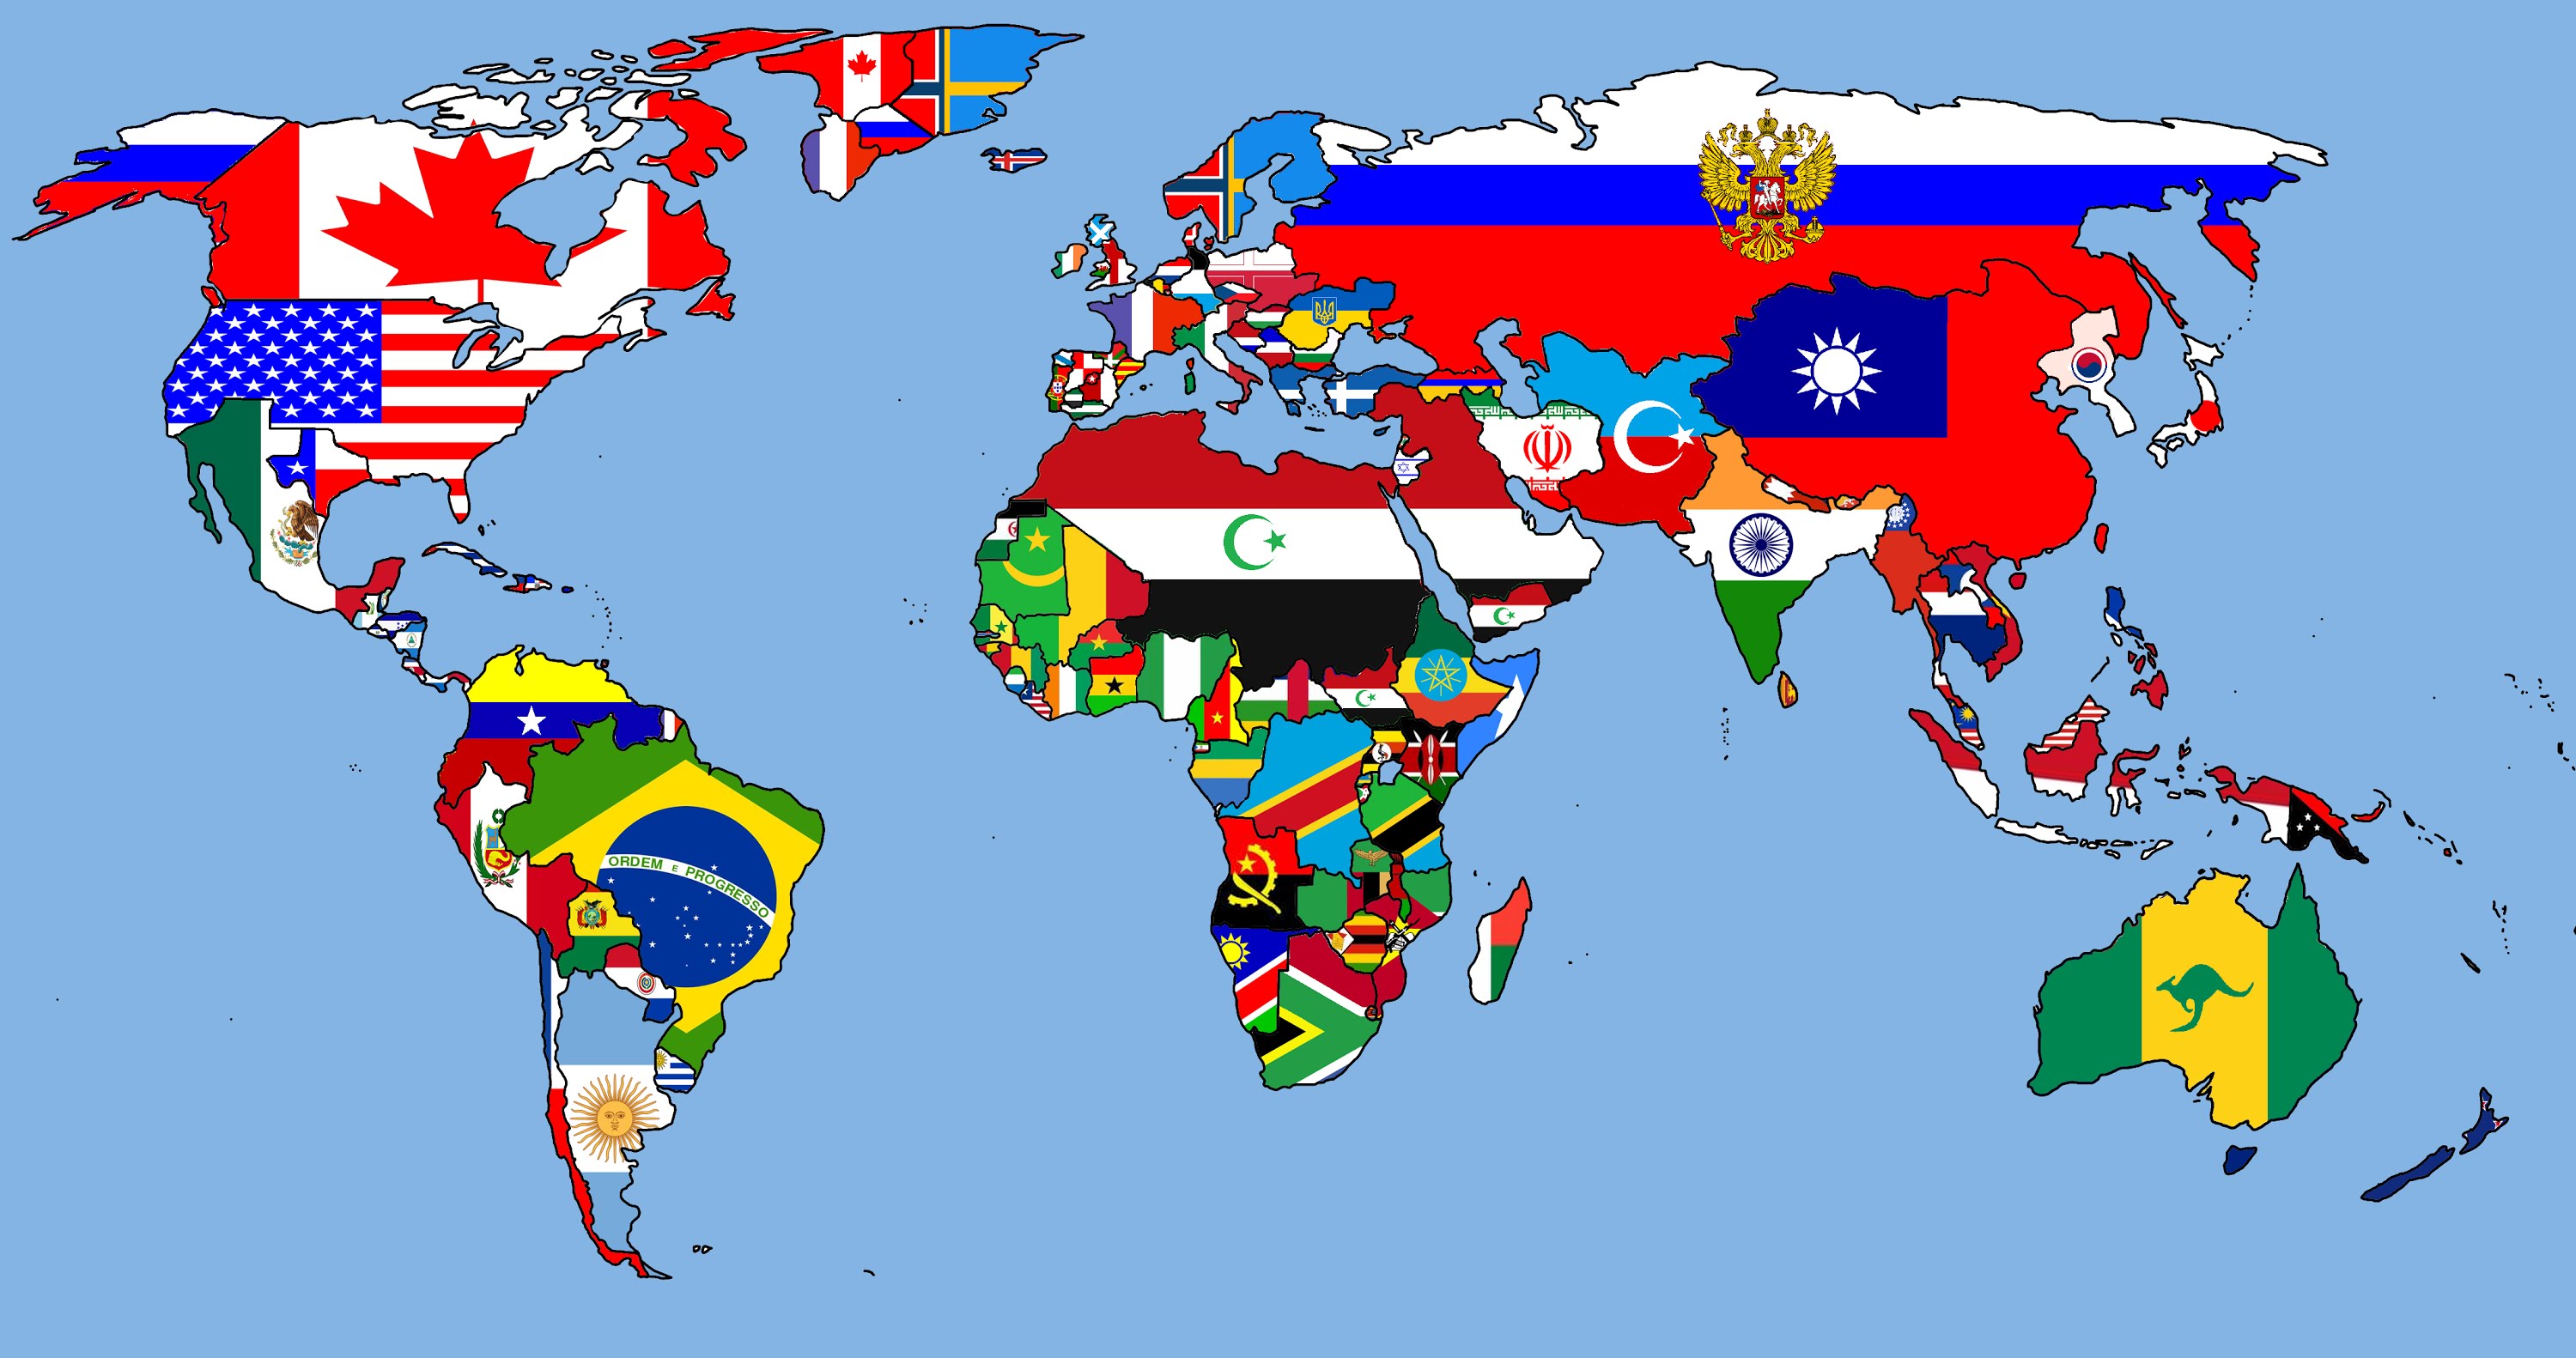 Alterative world map - The flag map next years - YouTube